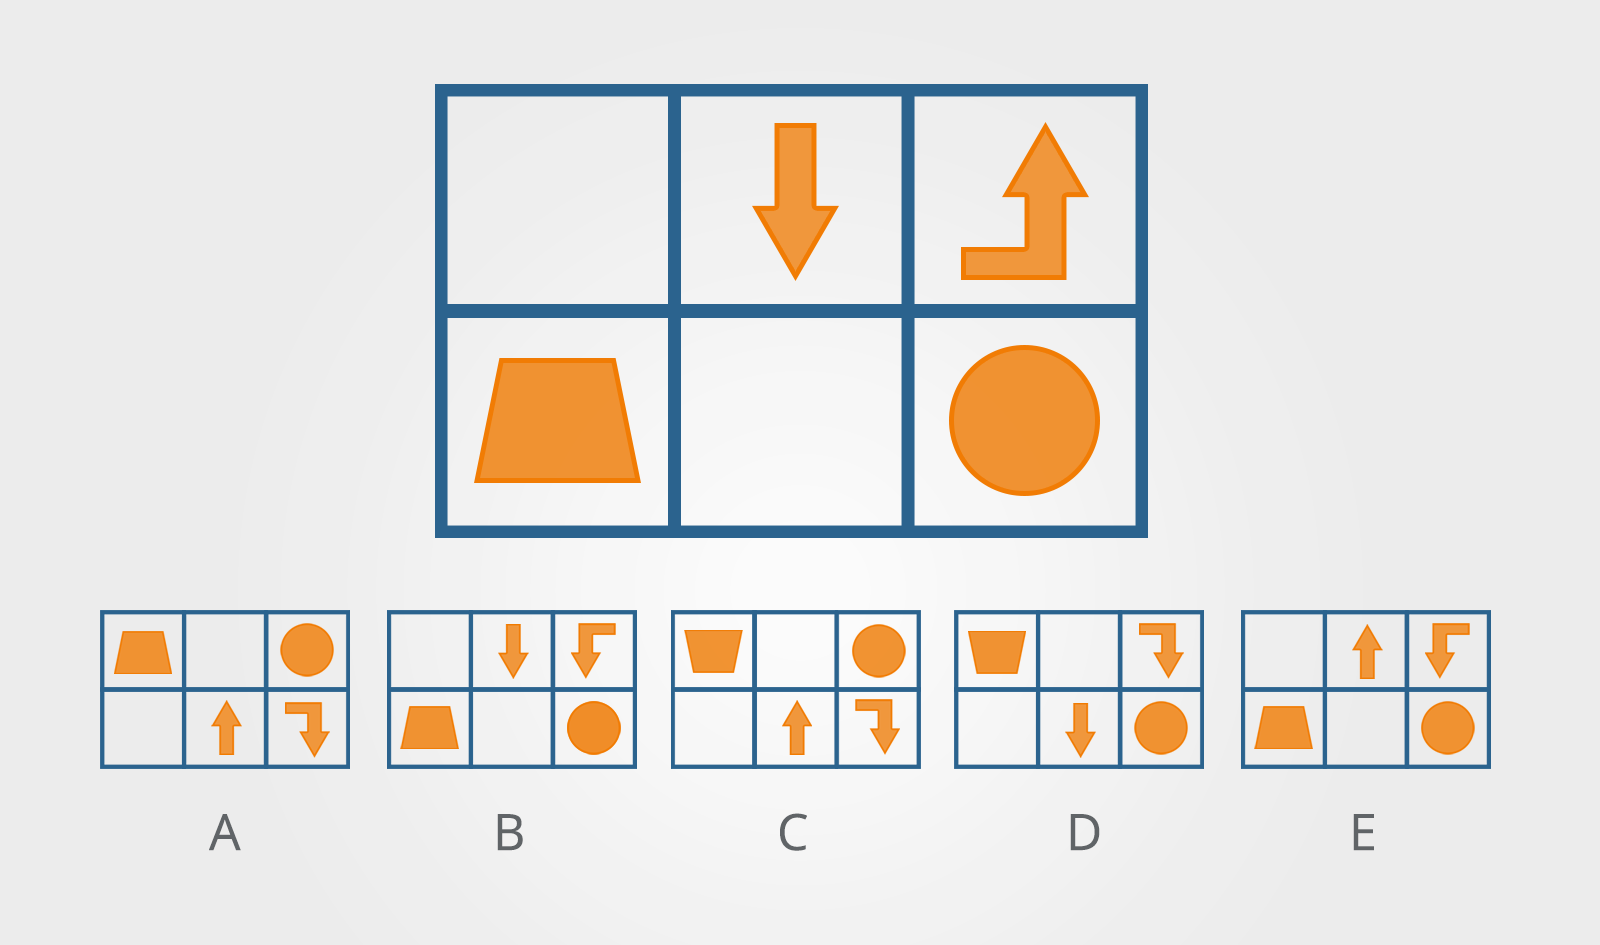 Spatial Ability Reasoning Tests